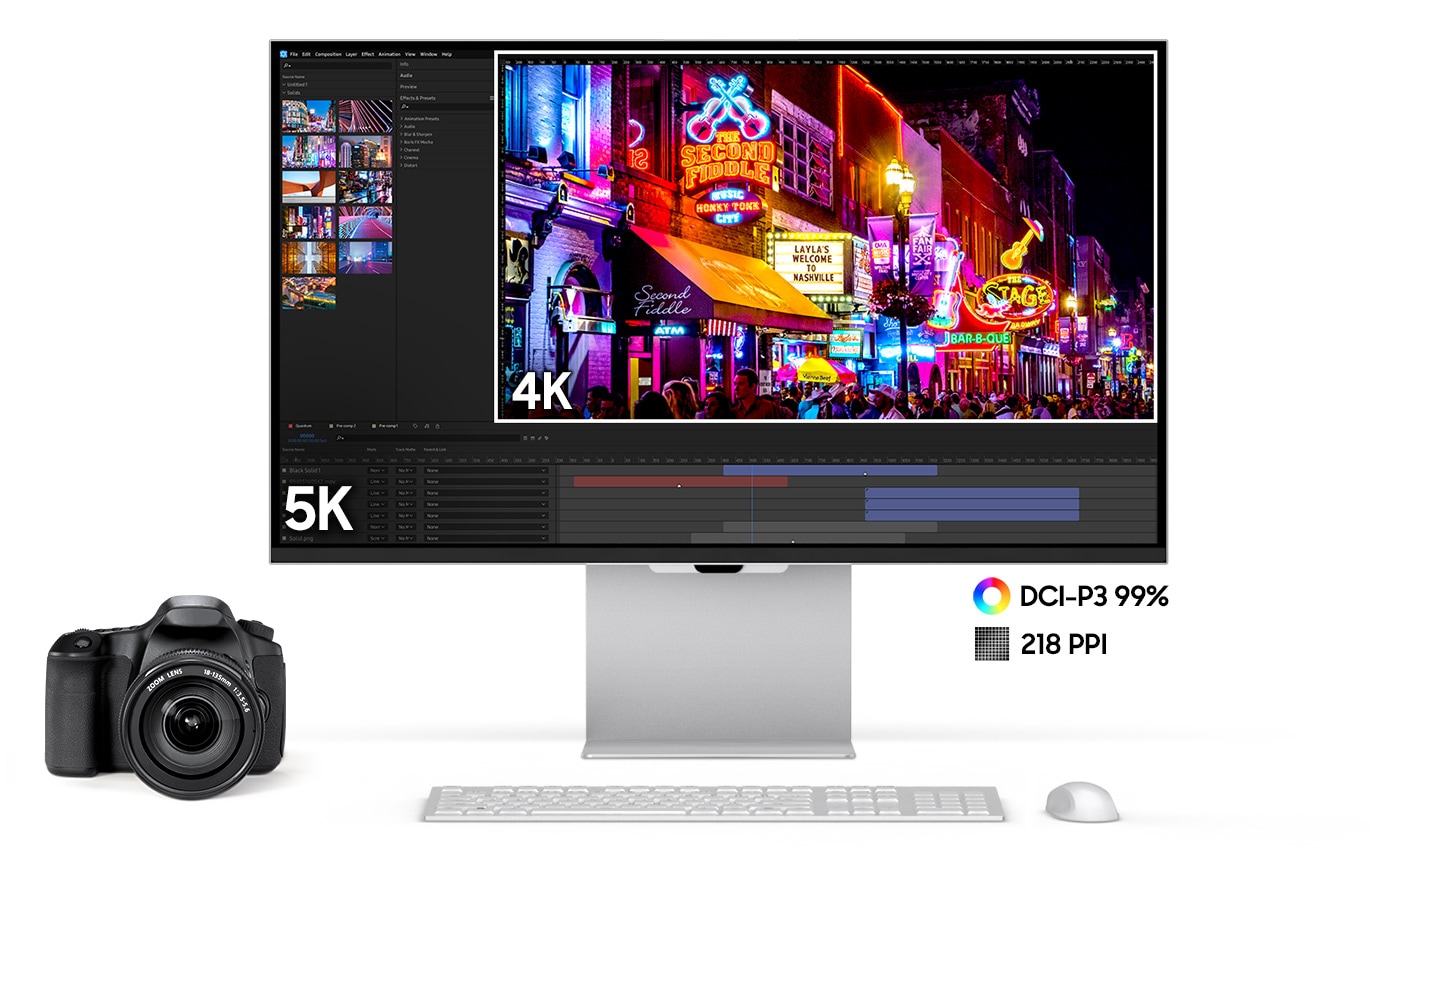 There is a colorful image and a working tool on the monitor. In the image, there're 4K and 5K texts, which mean the 5K has bigger space than 4K. Under the monitor, there's DCI-P3 99% and 218 PPI texts as well. In front of it, there're a camera, keyboard, and mouse.